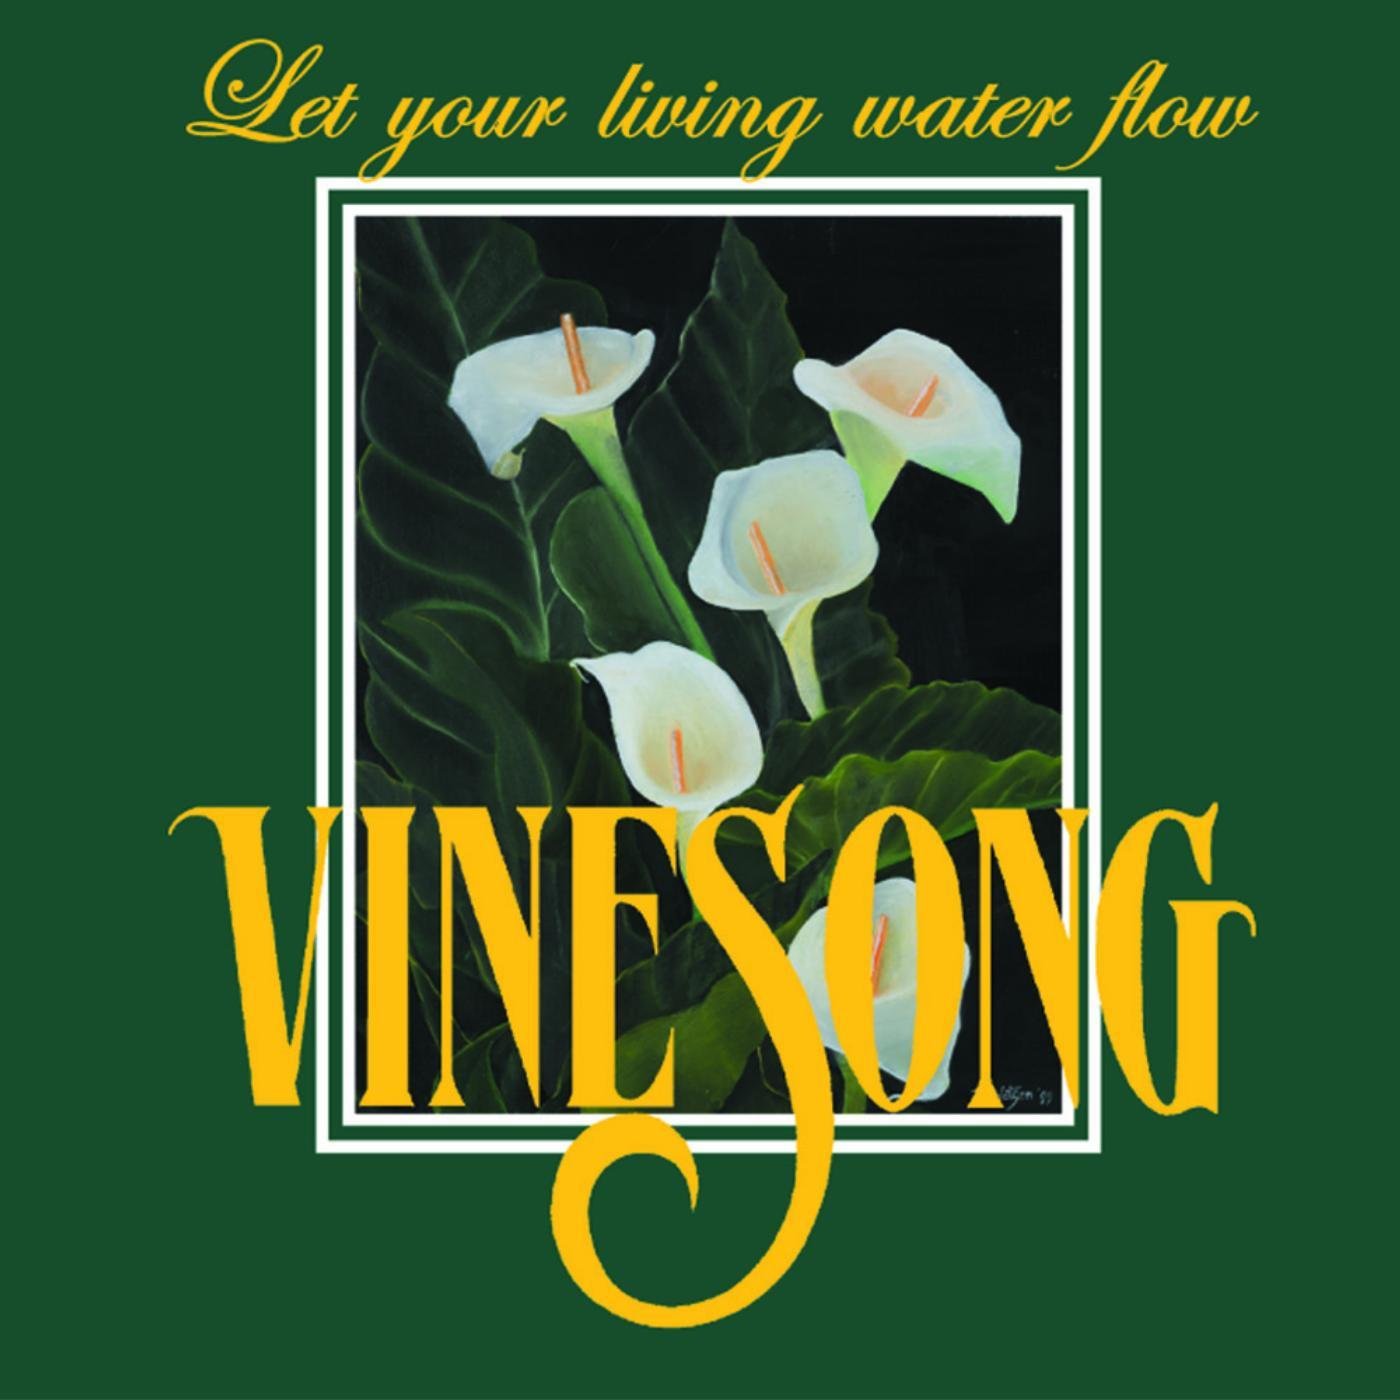 Vinesong-Let Your Living Water Flow Live-CD-FLAC-1993-FLACME